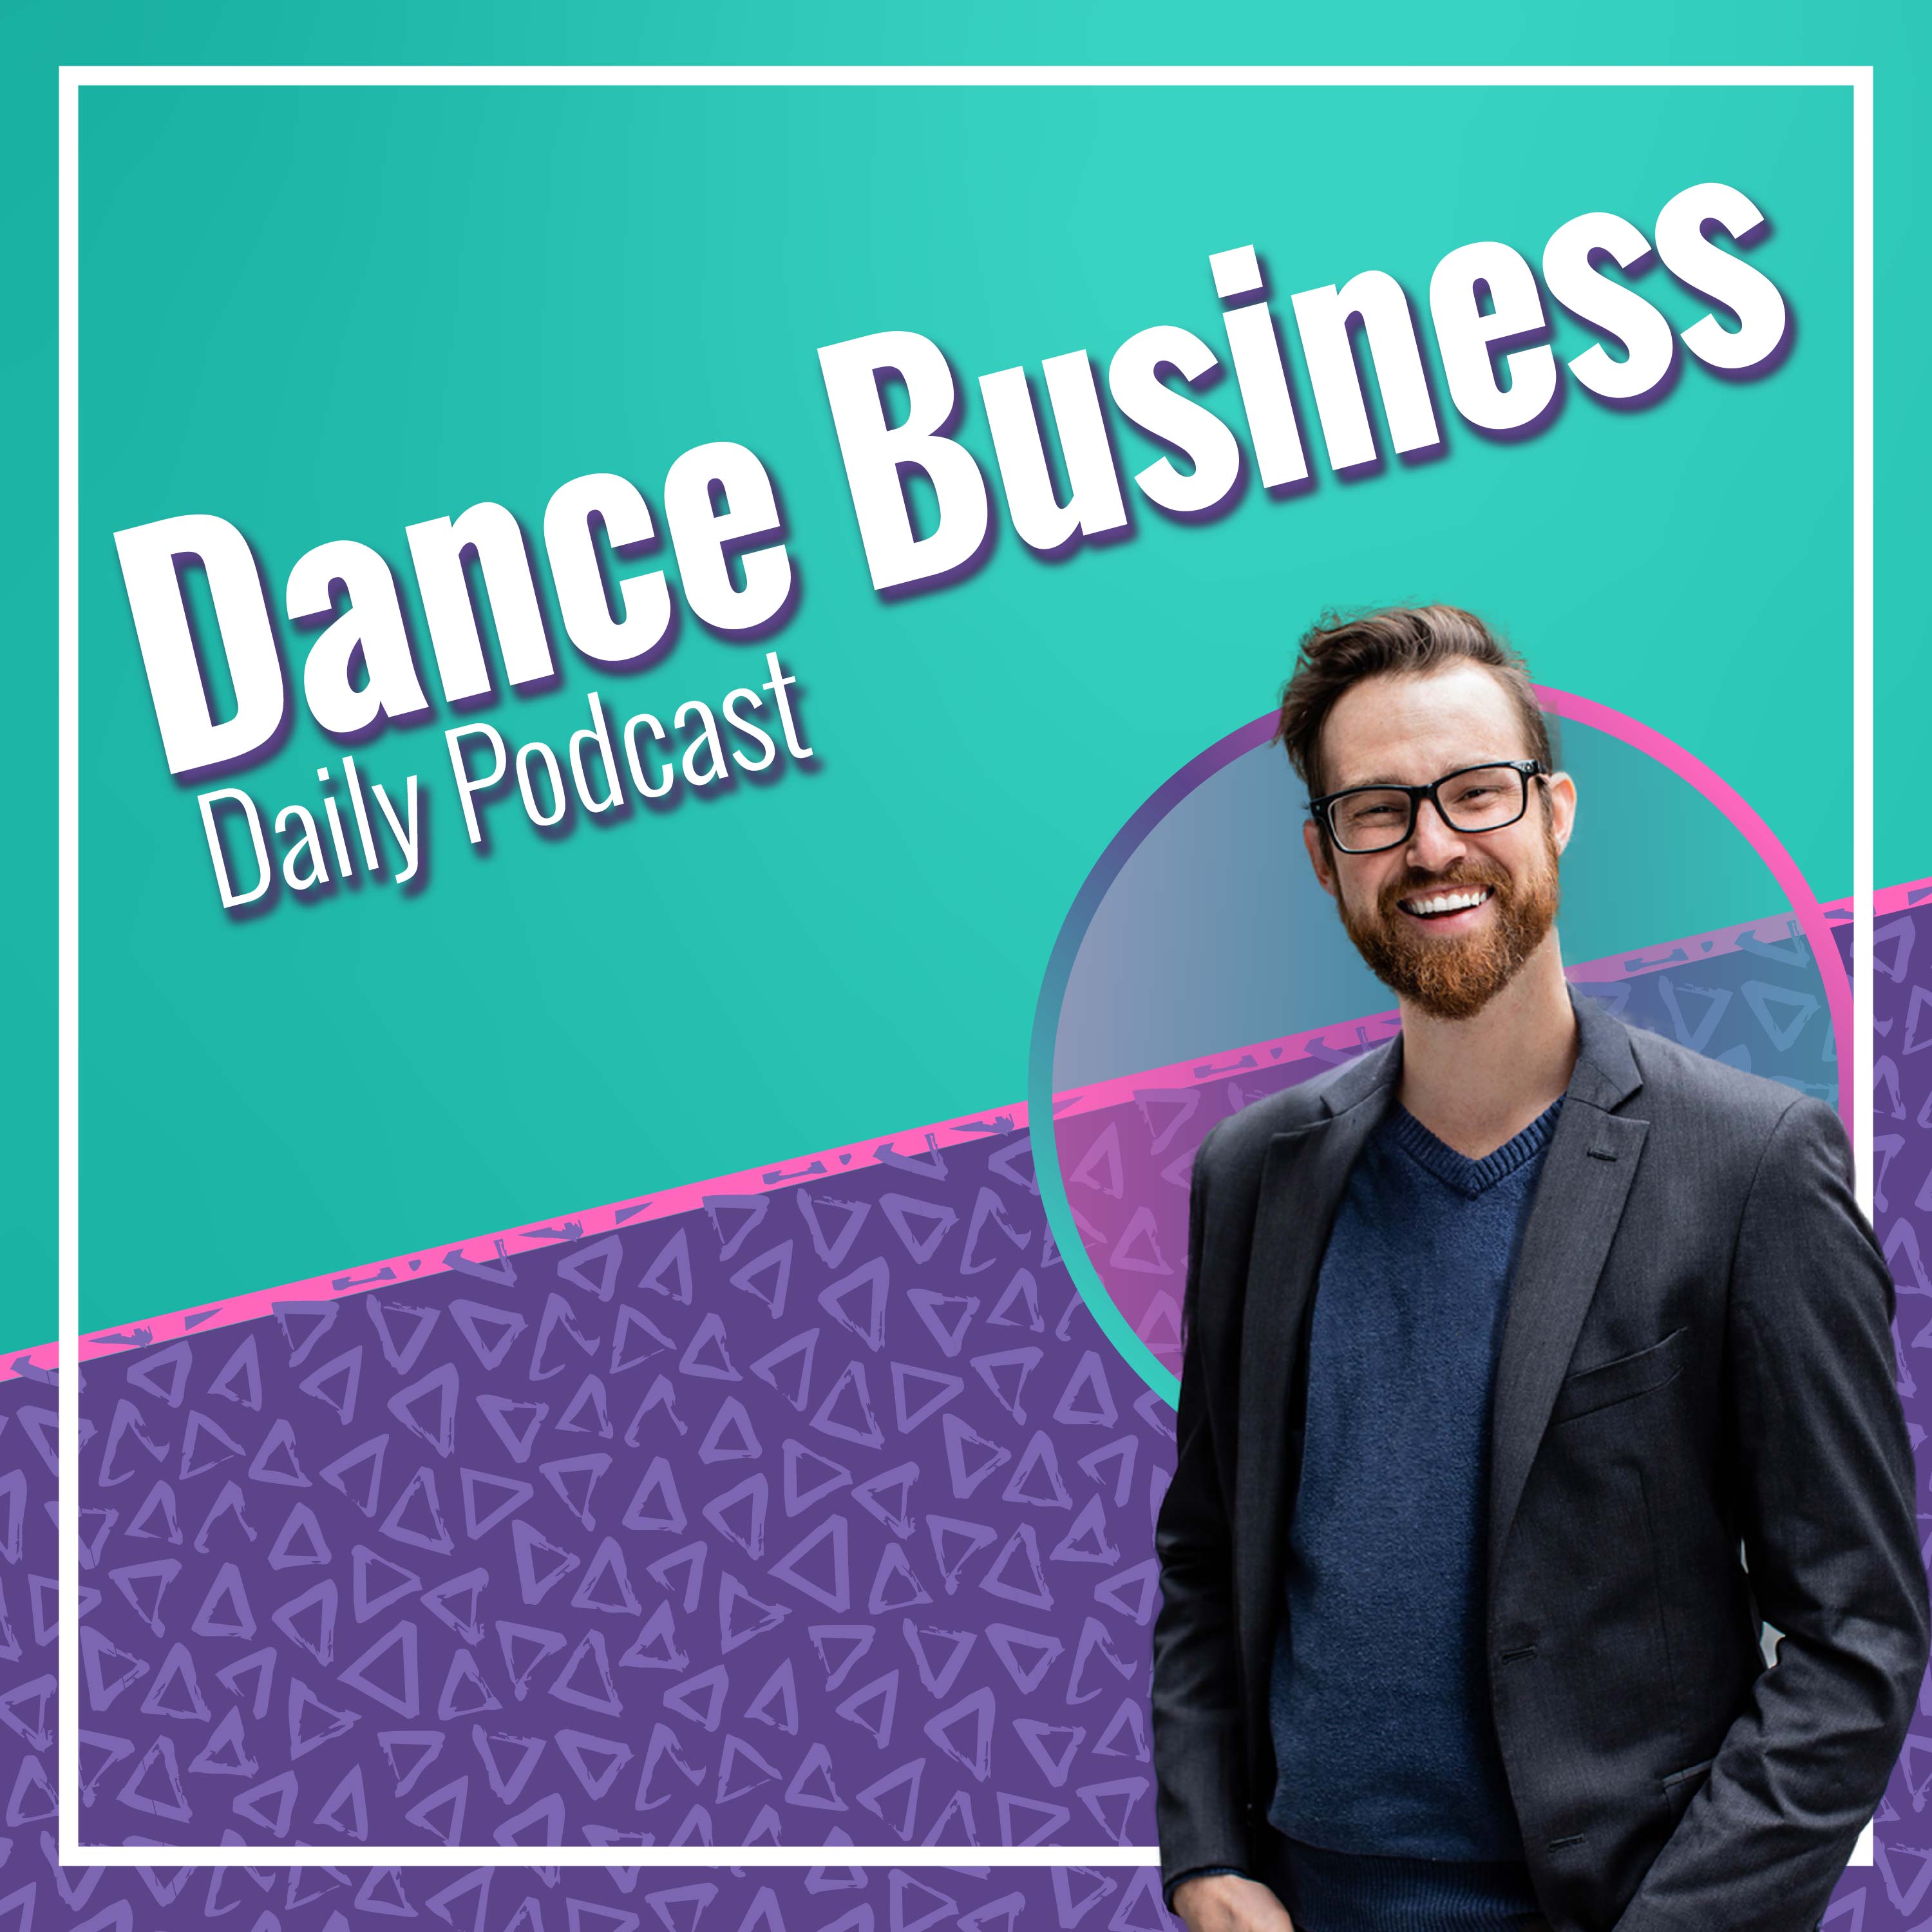 Artwork for Dance Business Daily